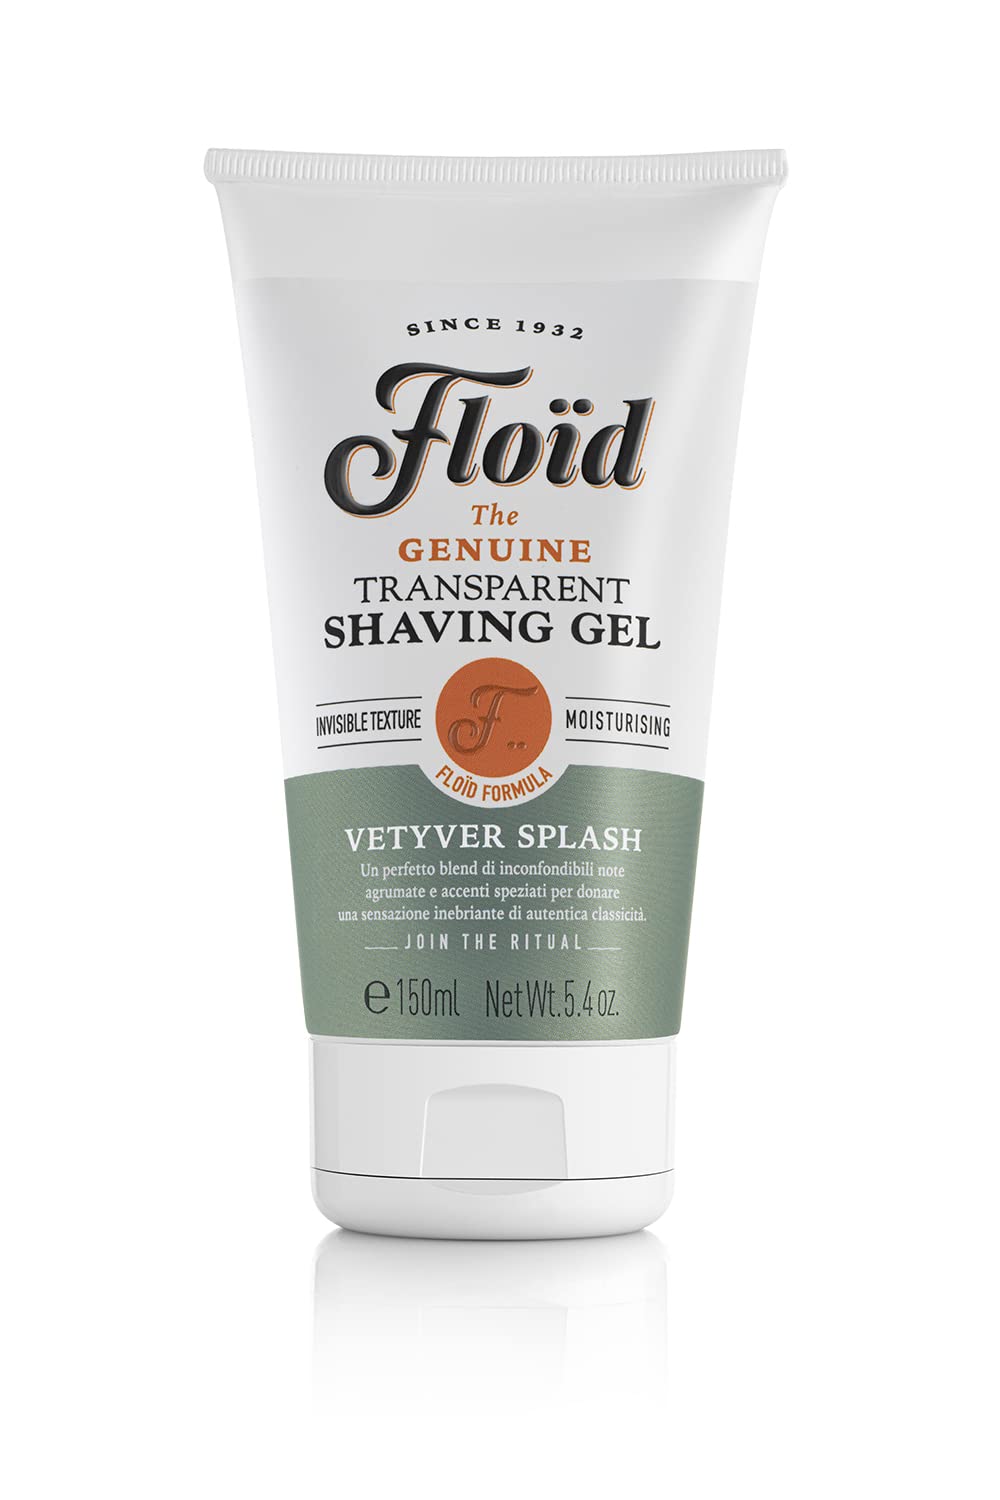 Floïd Vetyver Splash Shaving Gel (150 ml), Shaving Gel With Glycerine for Protecting and Hydrating the Skin, Transparent Gel for a Smooth Shave with Invigorating Scent